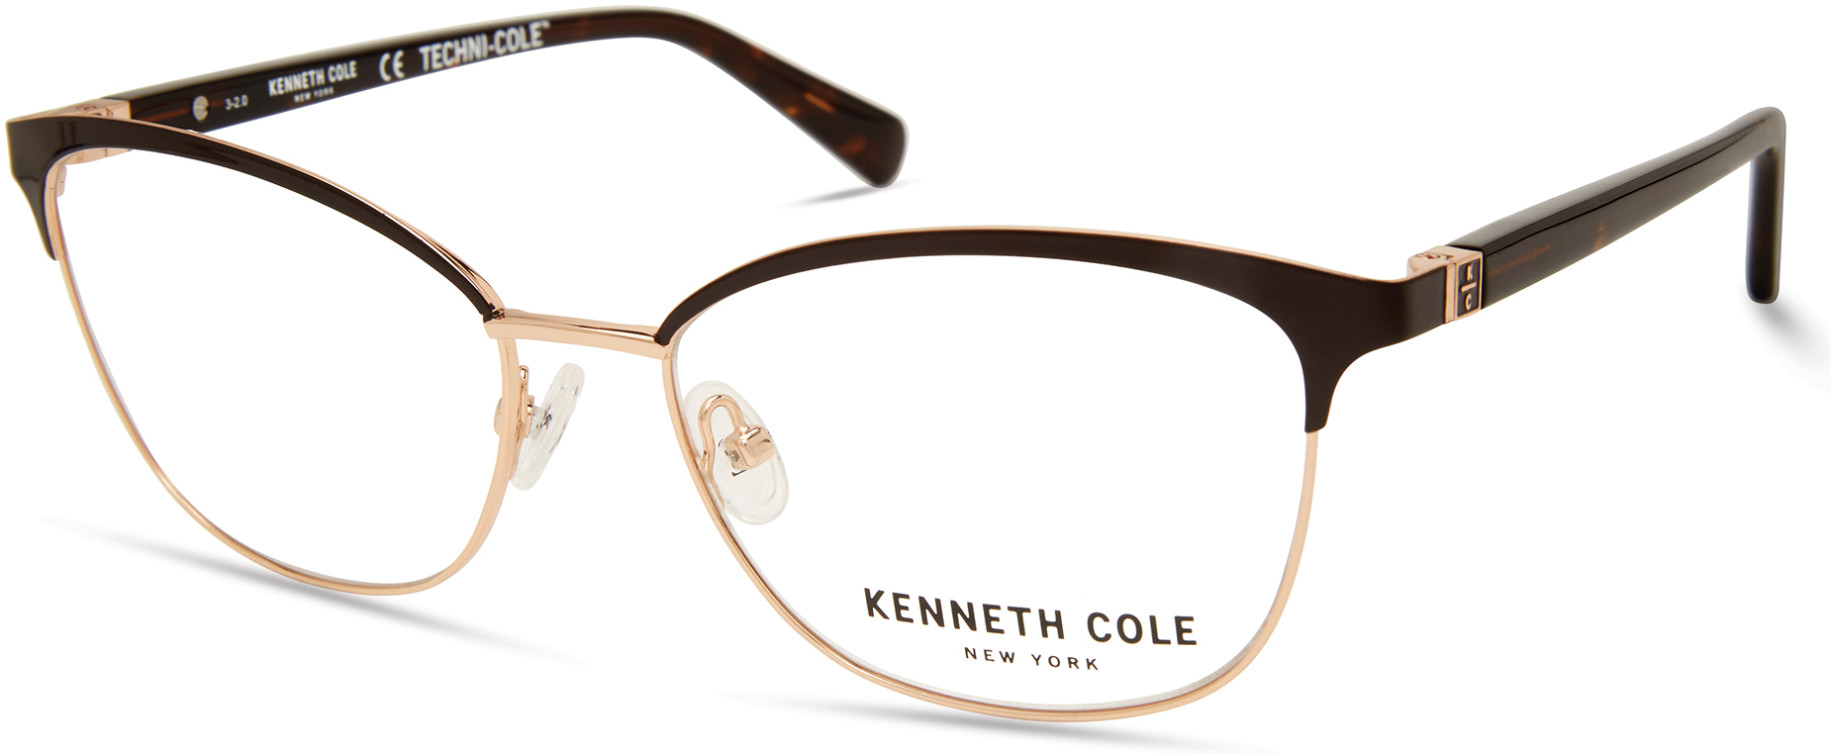 KENNETH COLE NY 0329 048